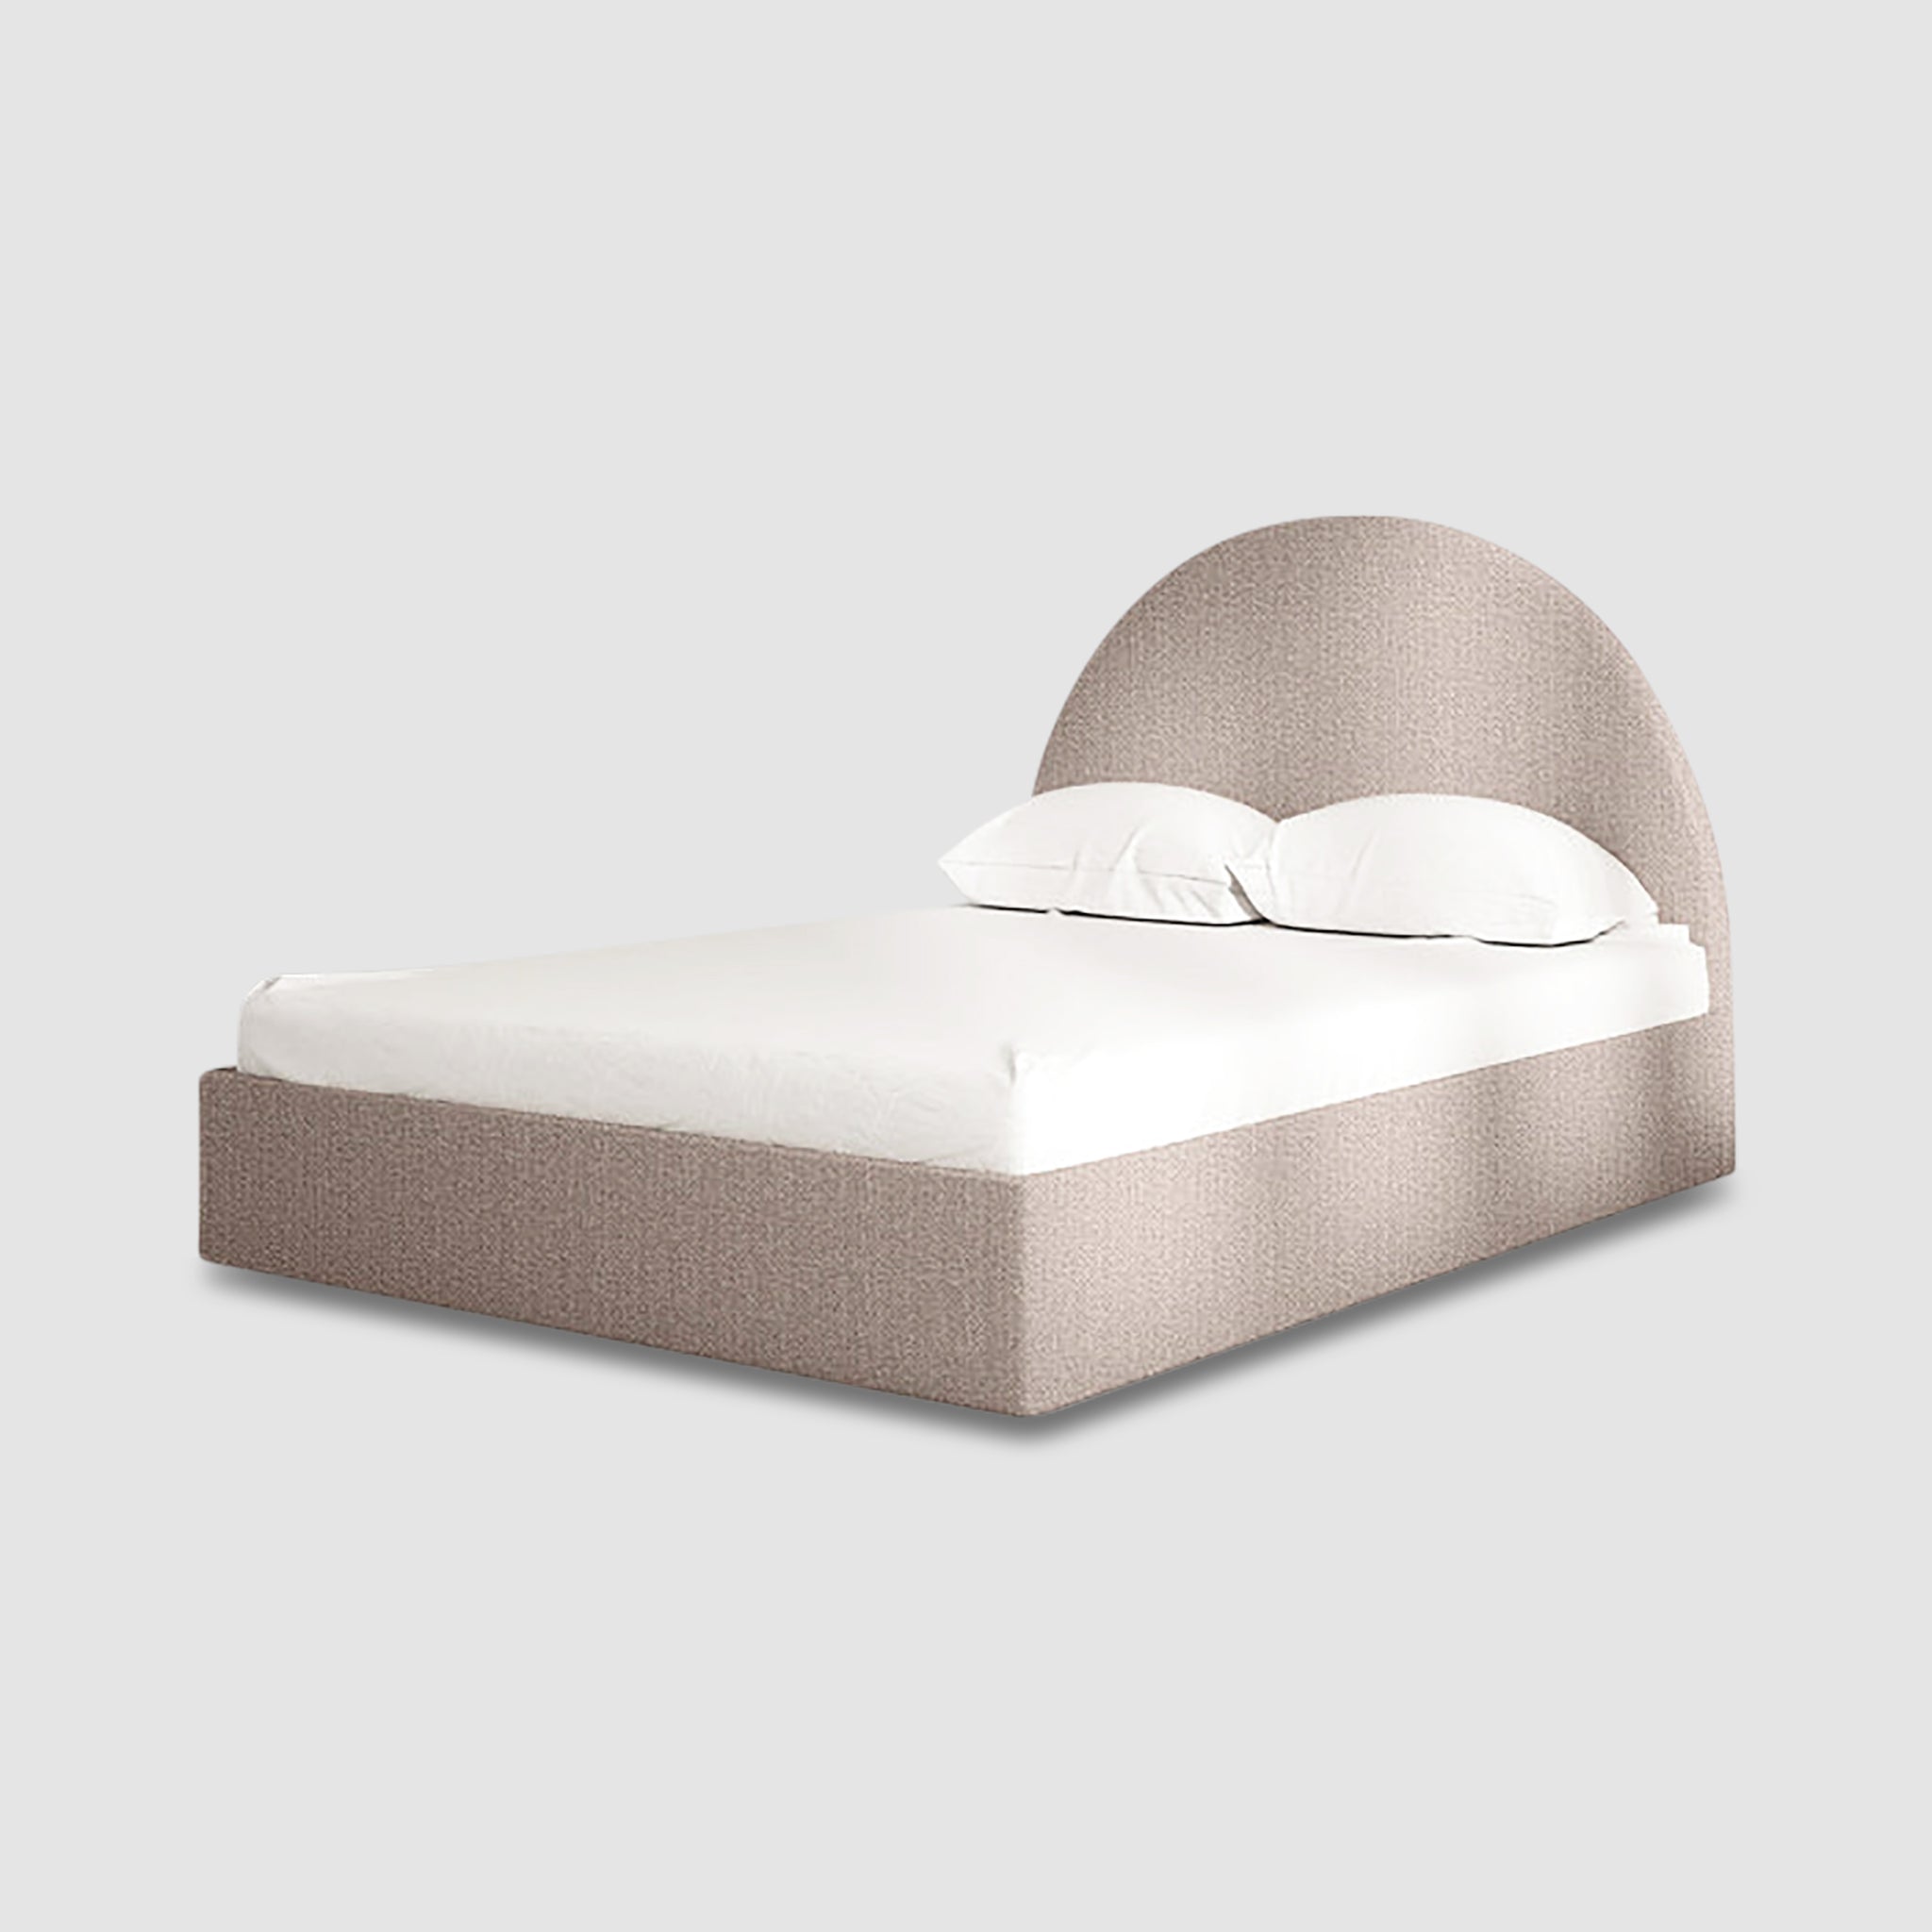 The Archie Bed with a sophisticated curved headboard in light grey upholstery.